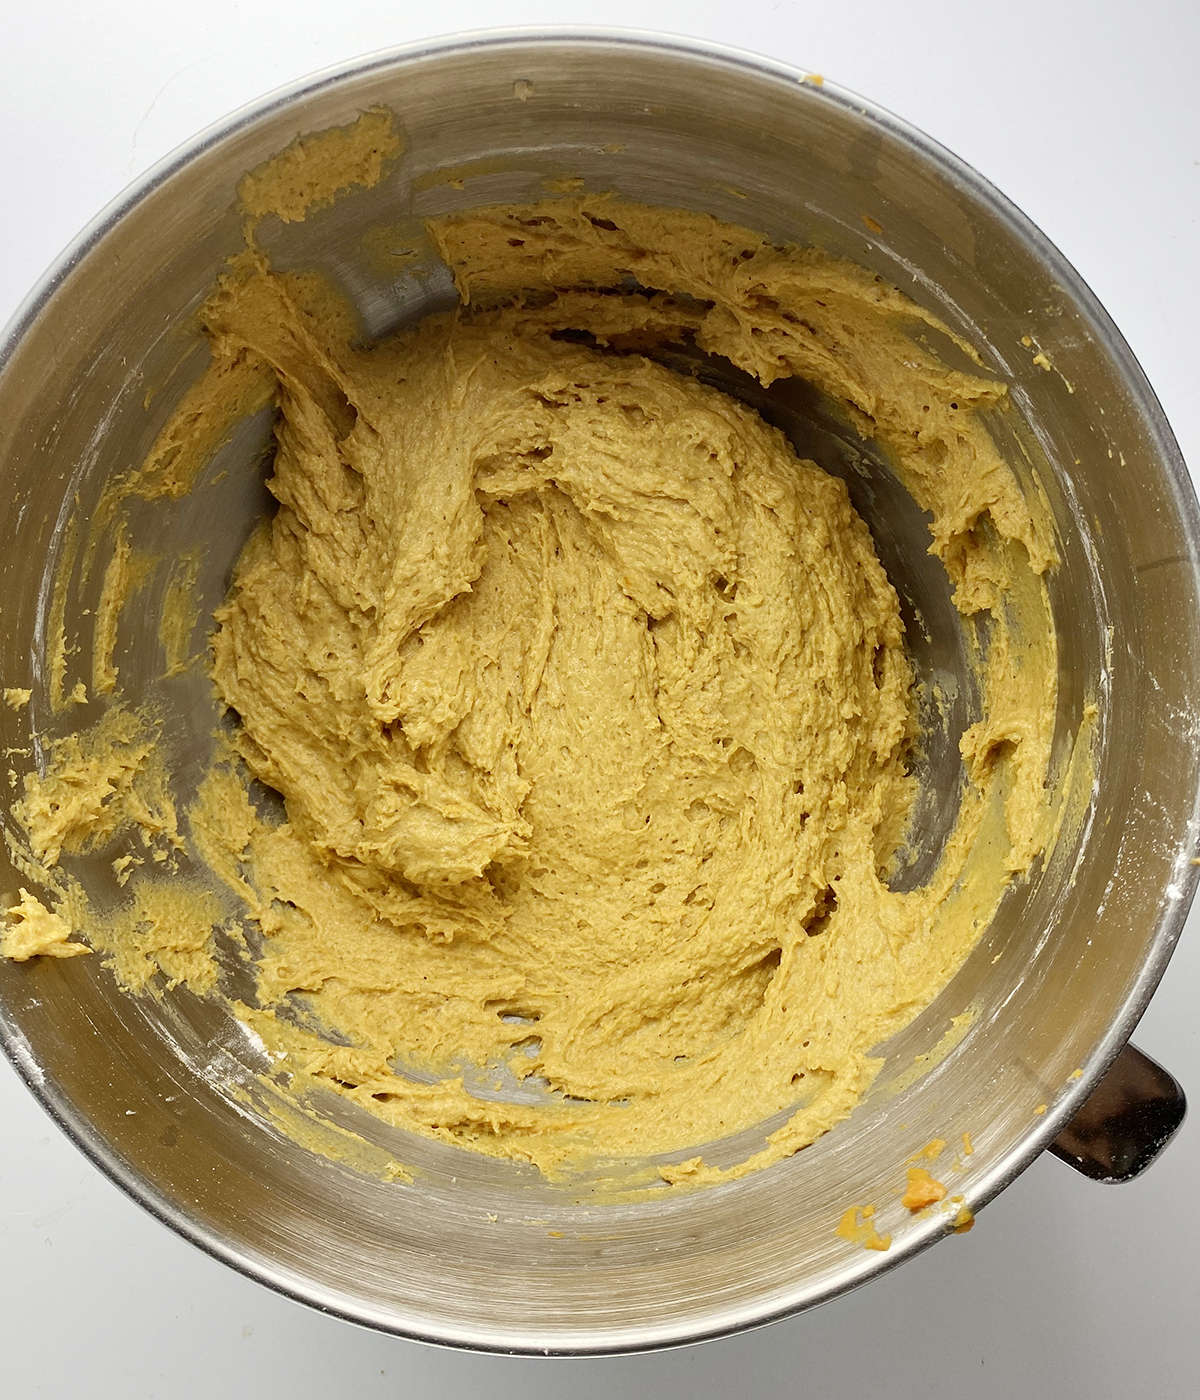 Finished pumpkin muffin batter in a mixing bowl.